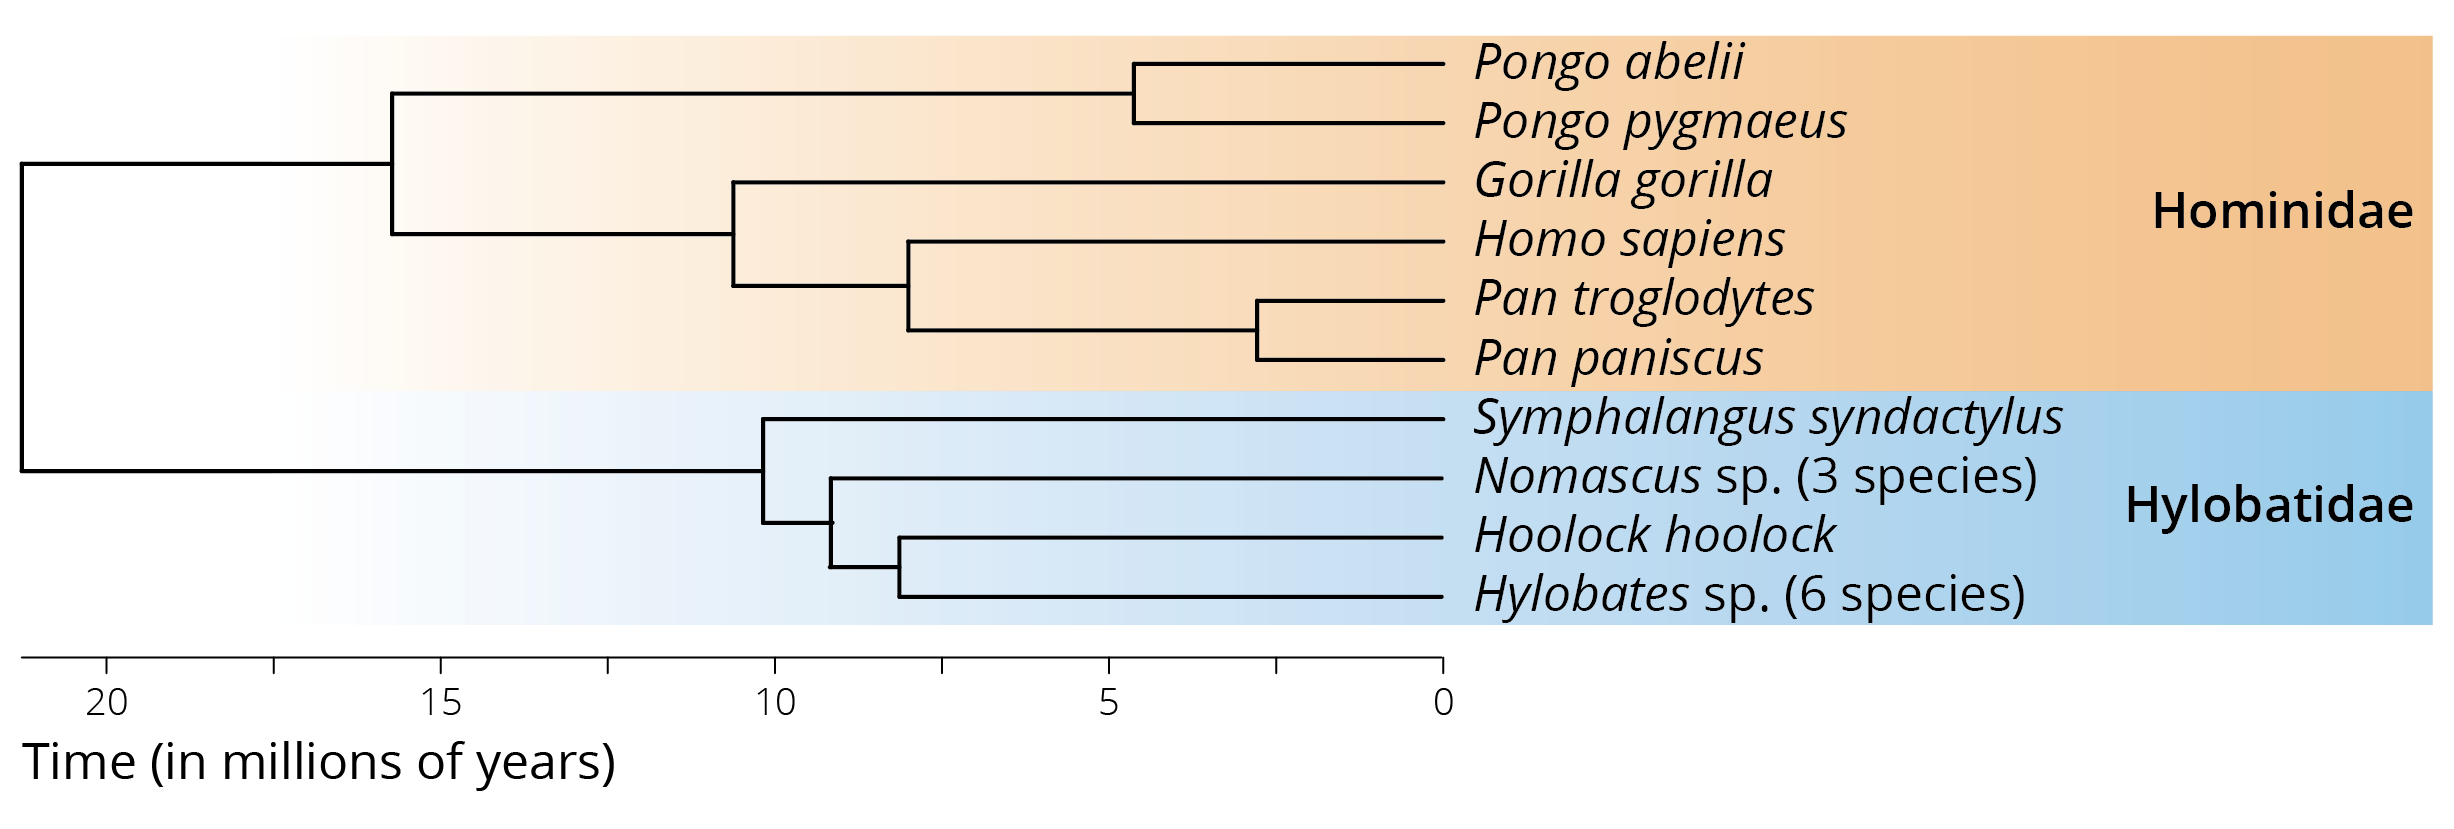 The phylogenetic position of humans relative to other species within the taxon Catarrhini, which includes the family Hominidae (great apes) and Hylobatidae (gibbons). Adopted from Chatterjee et al. (2009).